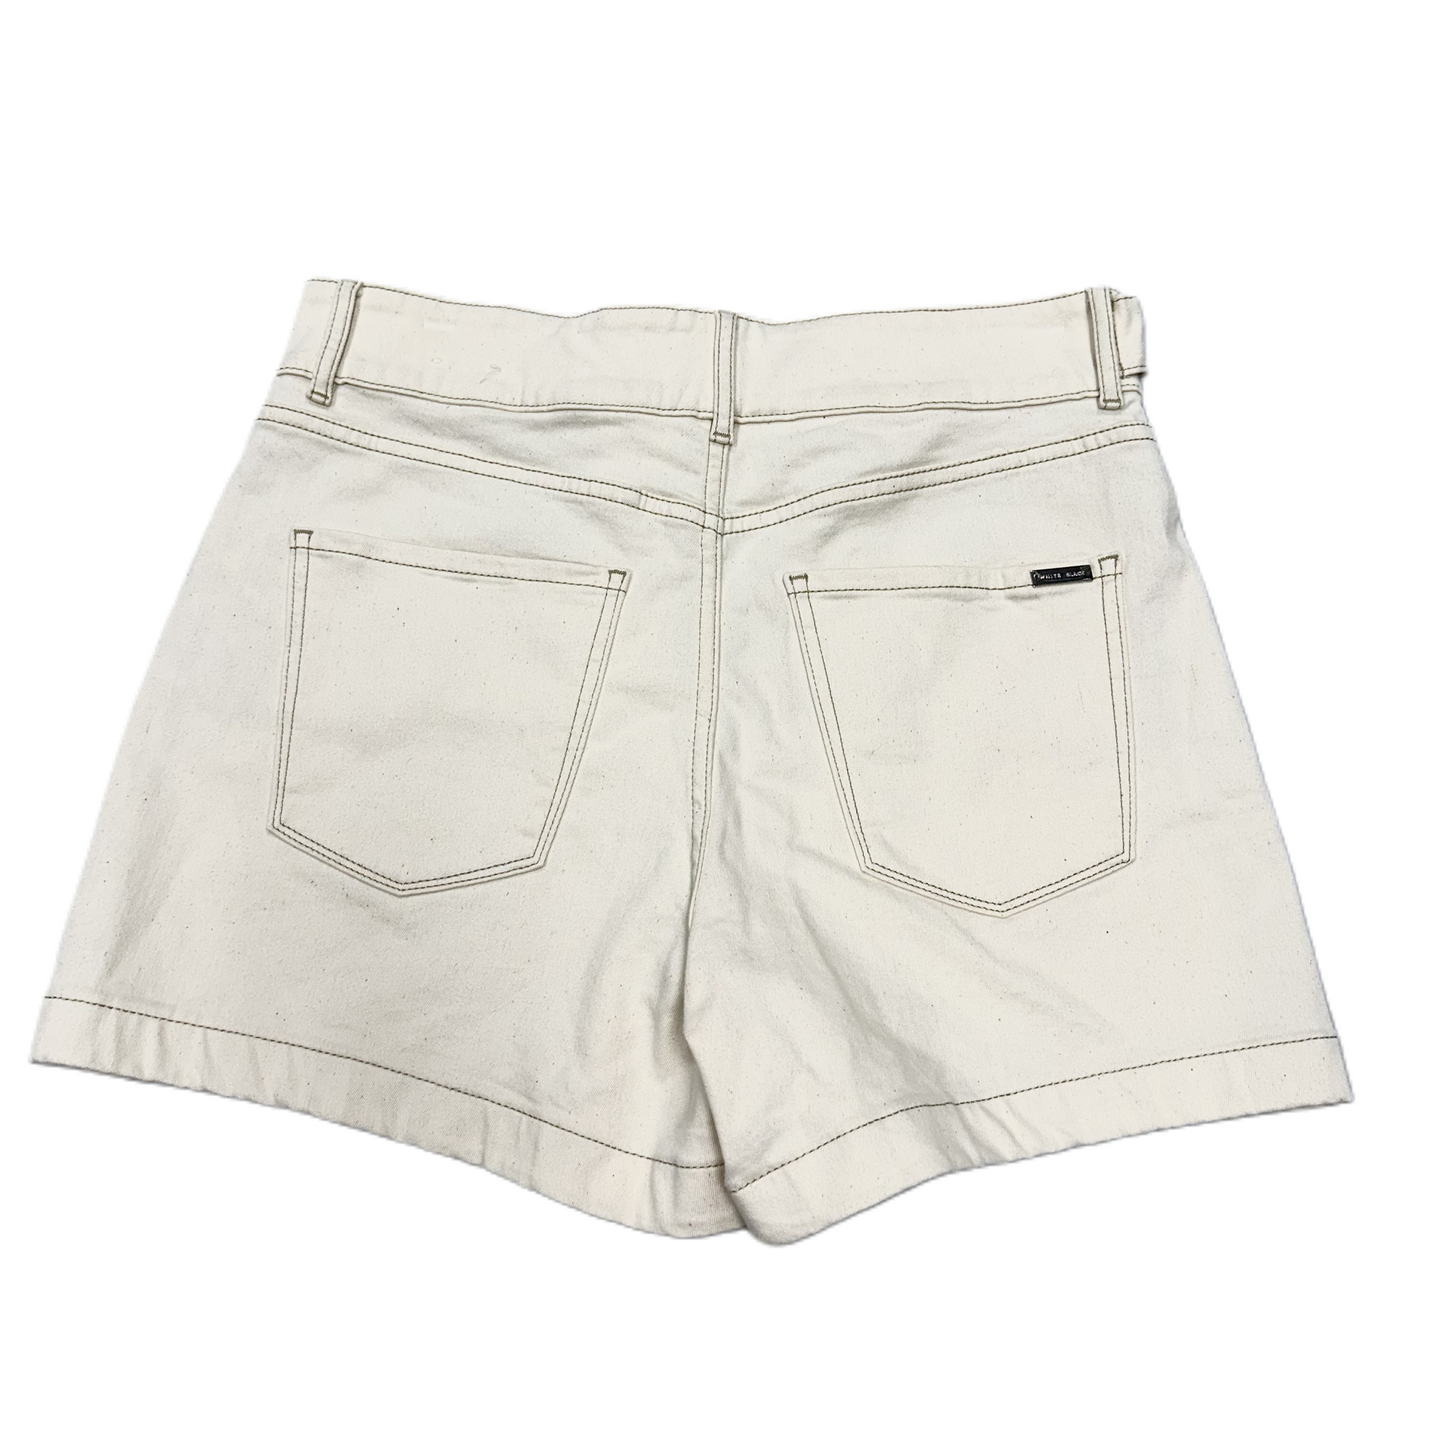 Cream Shorts By Chicos, Size: 8